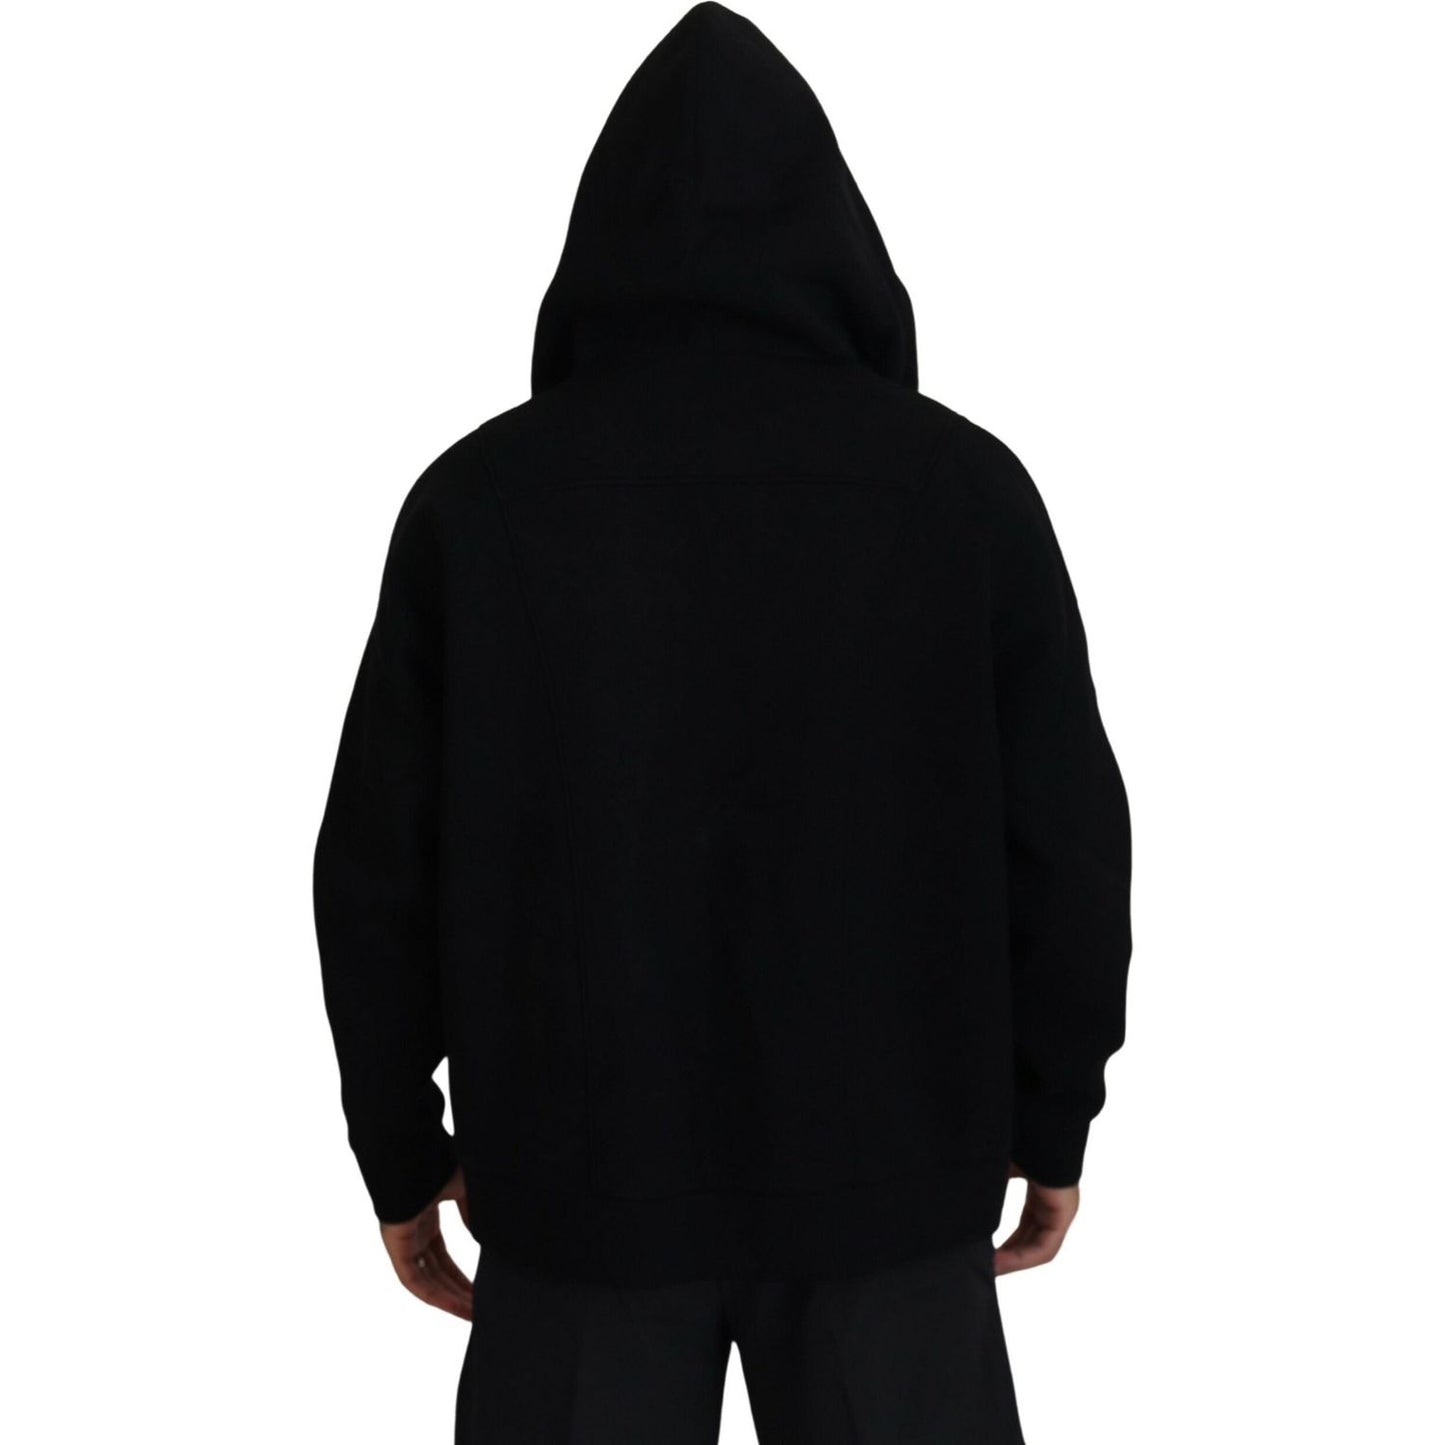 Dsquared² Black Hooded Printed Sleeves Double Zip Sweater black-hooded-printed-sleeves-double-zip-sweater